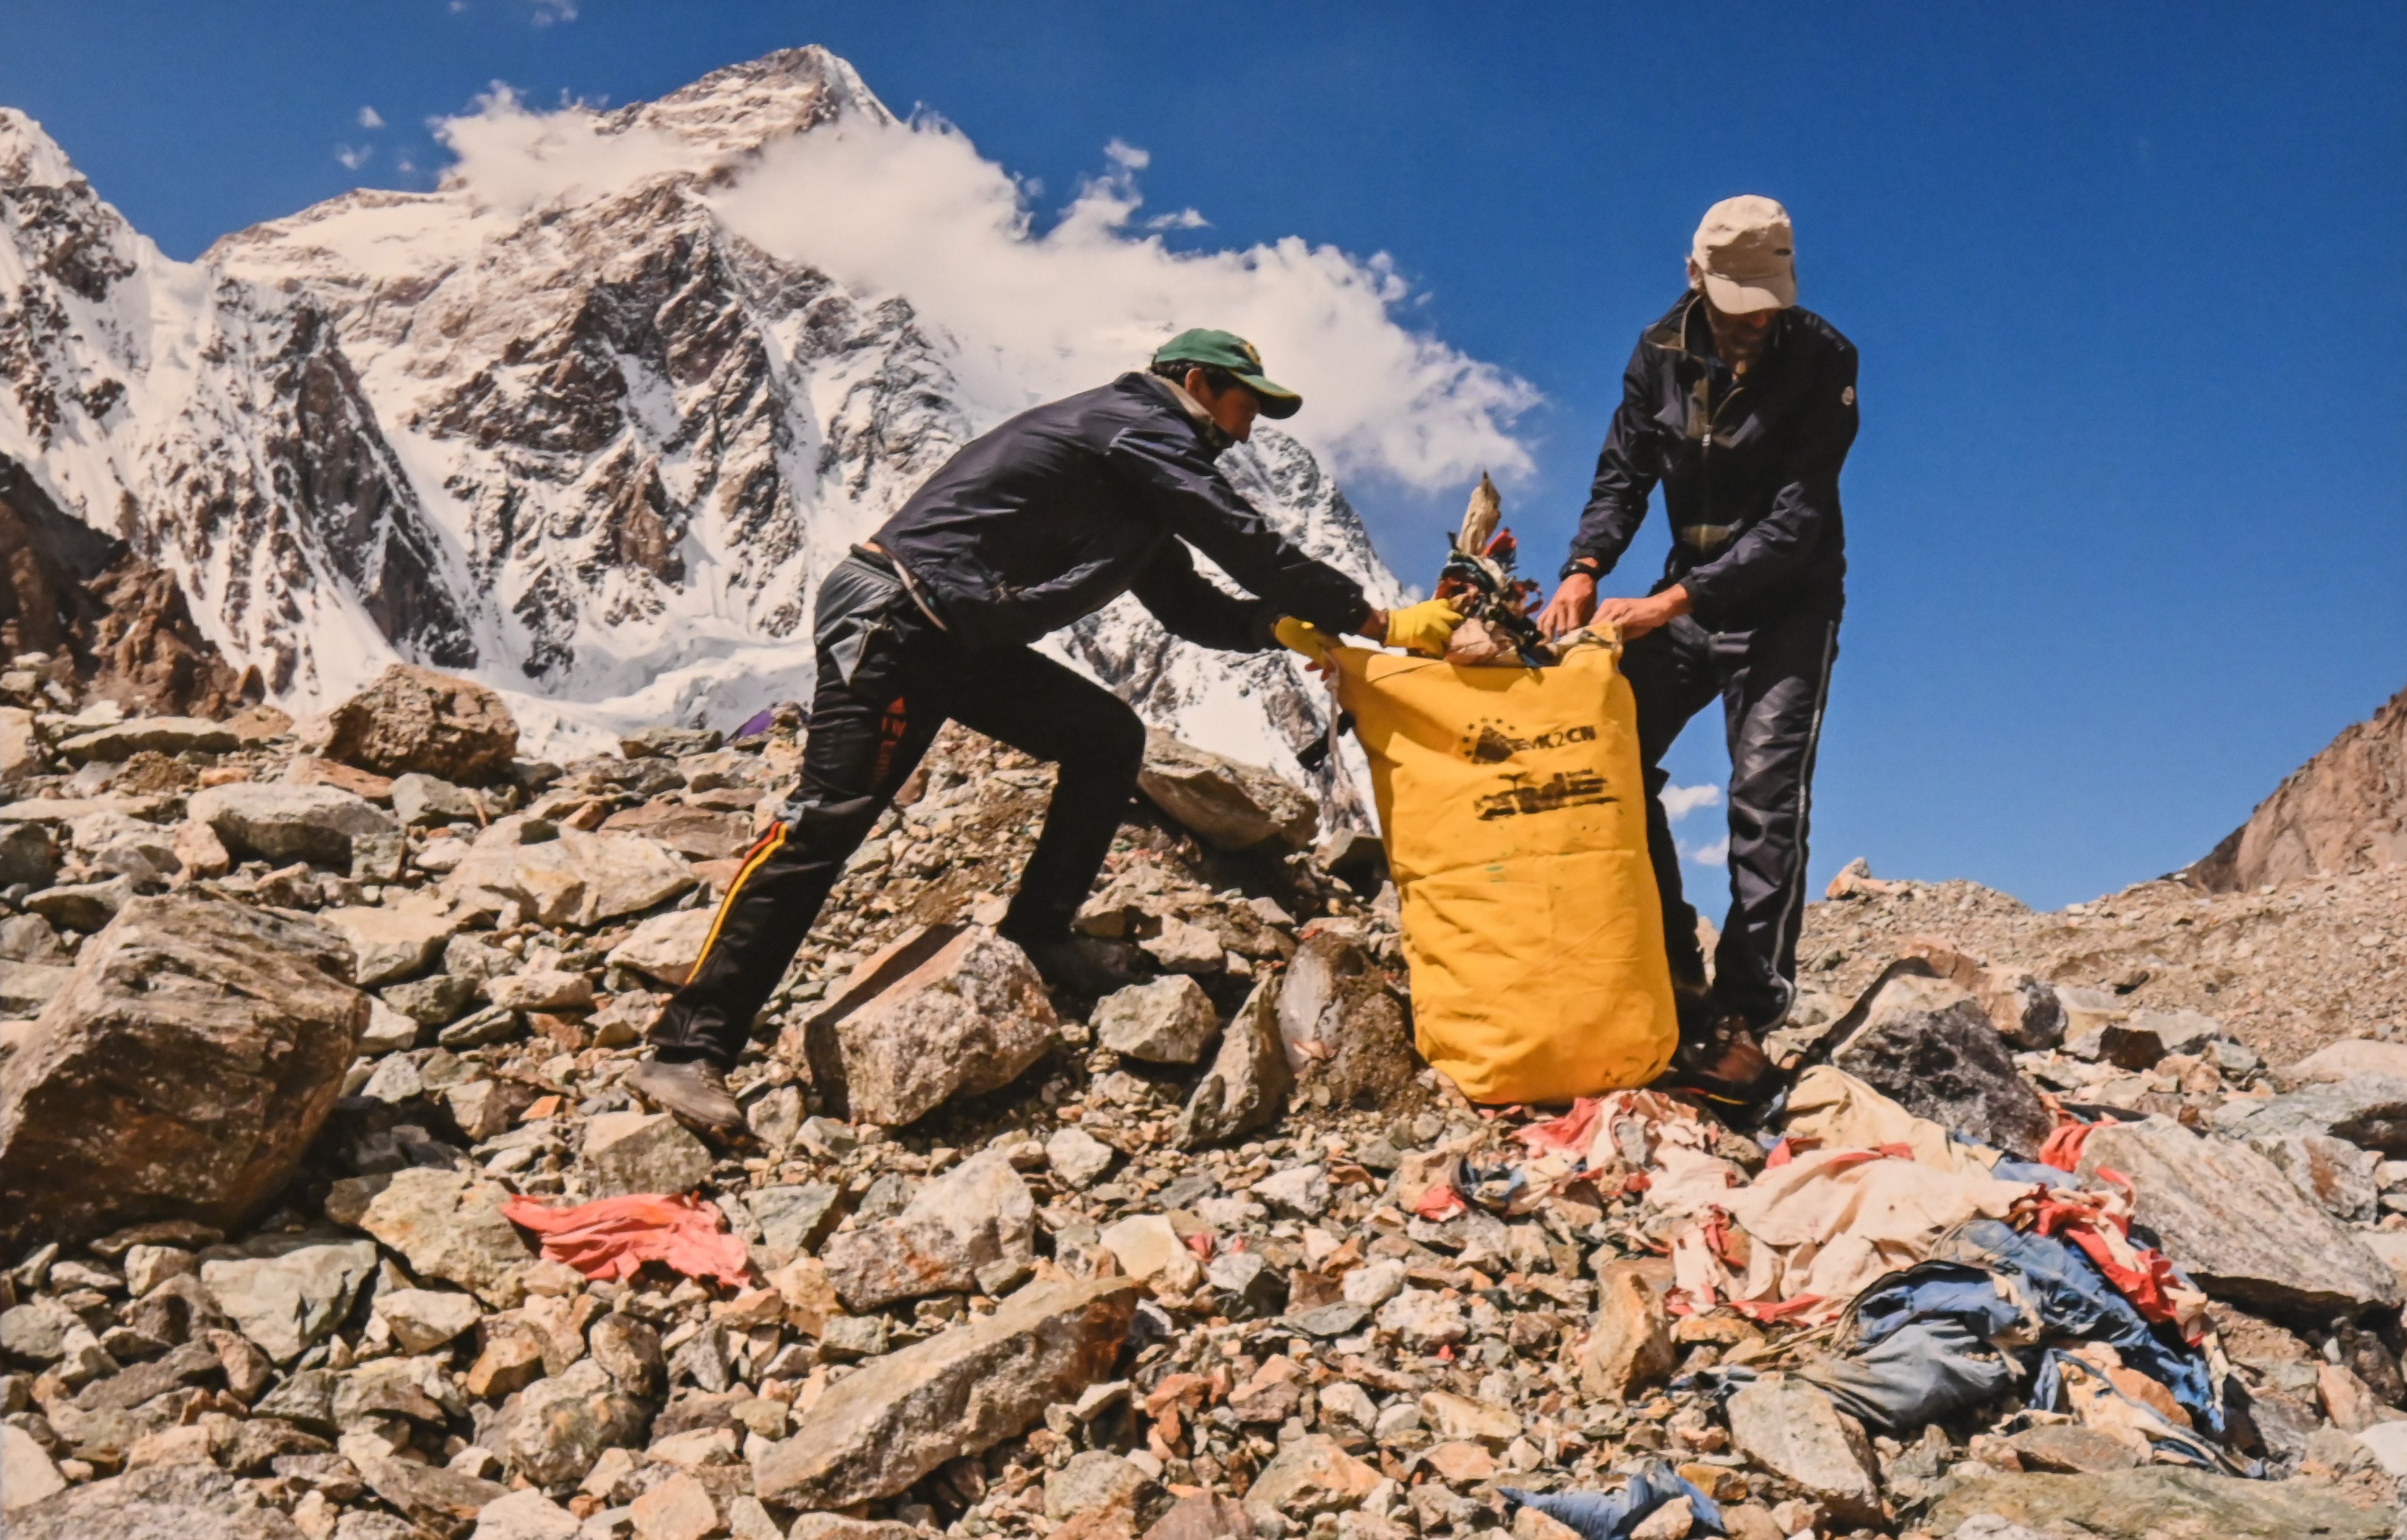 A volunteer collecting  plastic waste from the mountain region to keep it clean